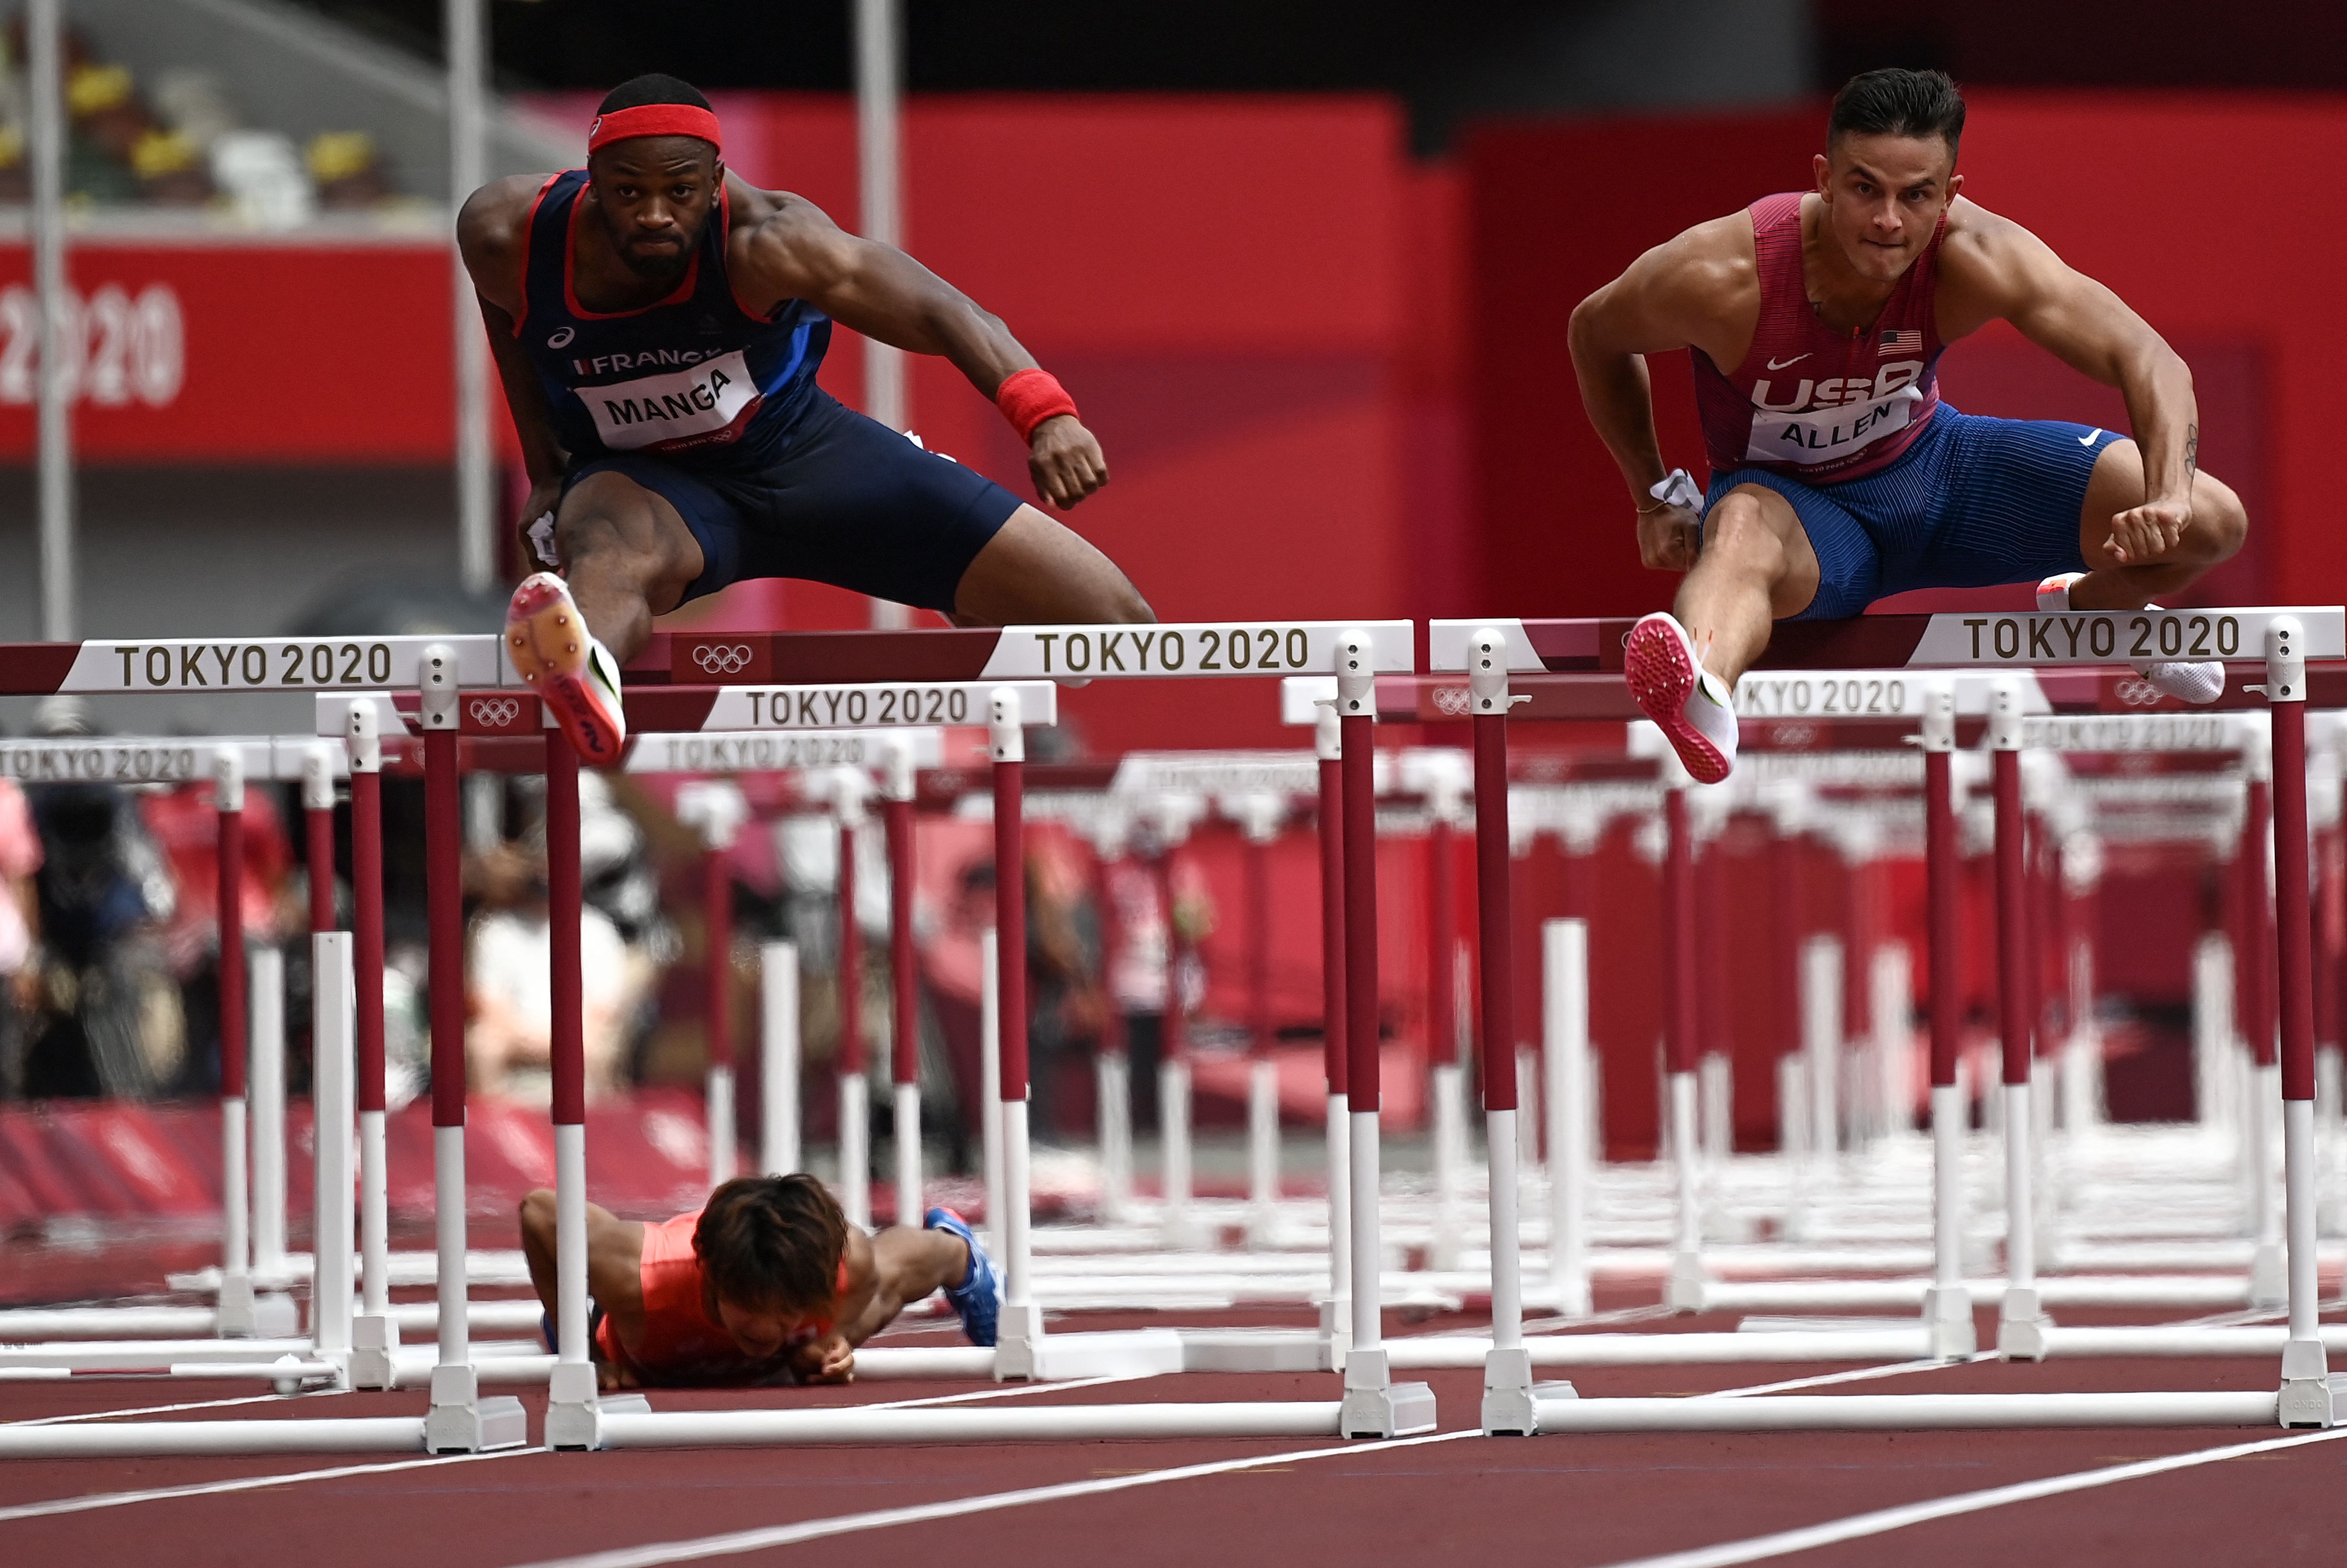 USA's Devon Allen (R) wins ahead of France's Aurel Manga (L) and Japan's Taio Kanai who fell in the men's 110m hurdles semi-finals at the Tokyo Games